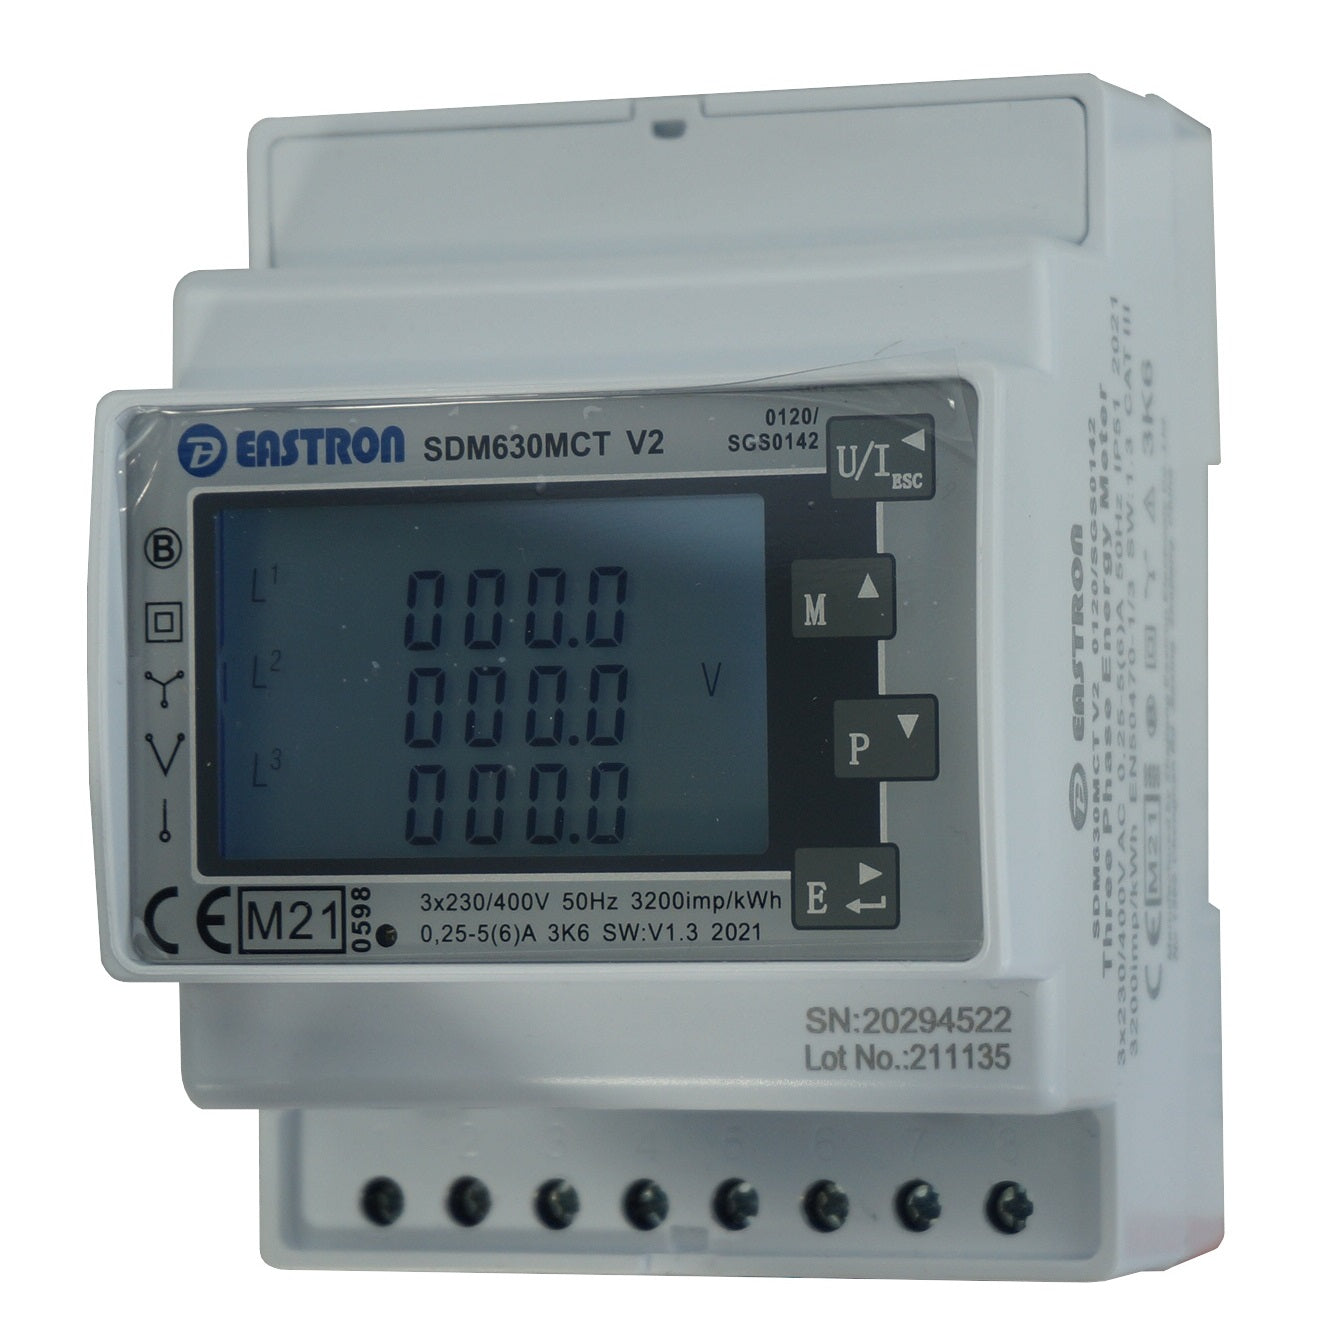 SDM630MCT-LORAWAN-MID-AS923, DIN Rail Mount kWh Meter, 3 Phase, 240VAC aux, Class 1, 1/5 Amp CT Connect, w/ 2 x pulse outputs and LoRaWaN AS923 Wireless Comms